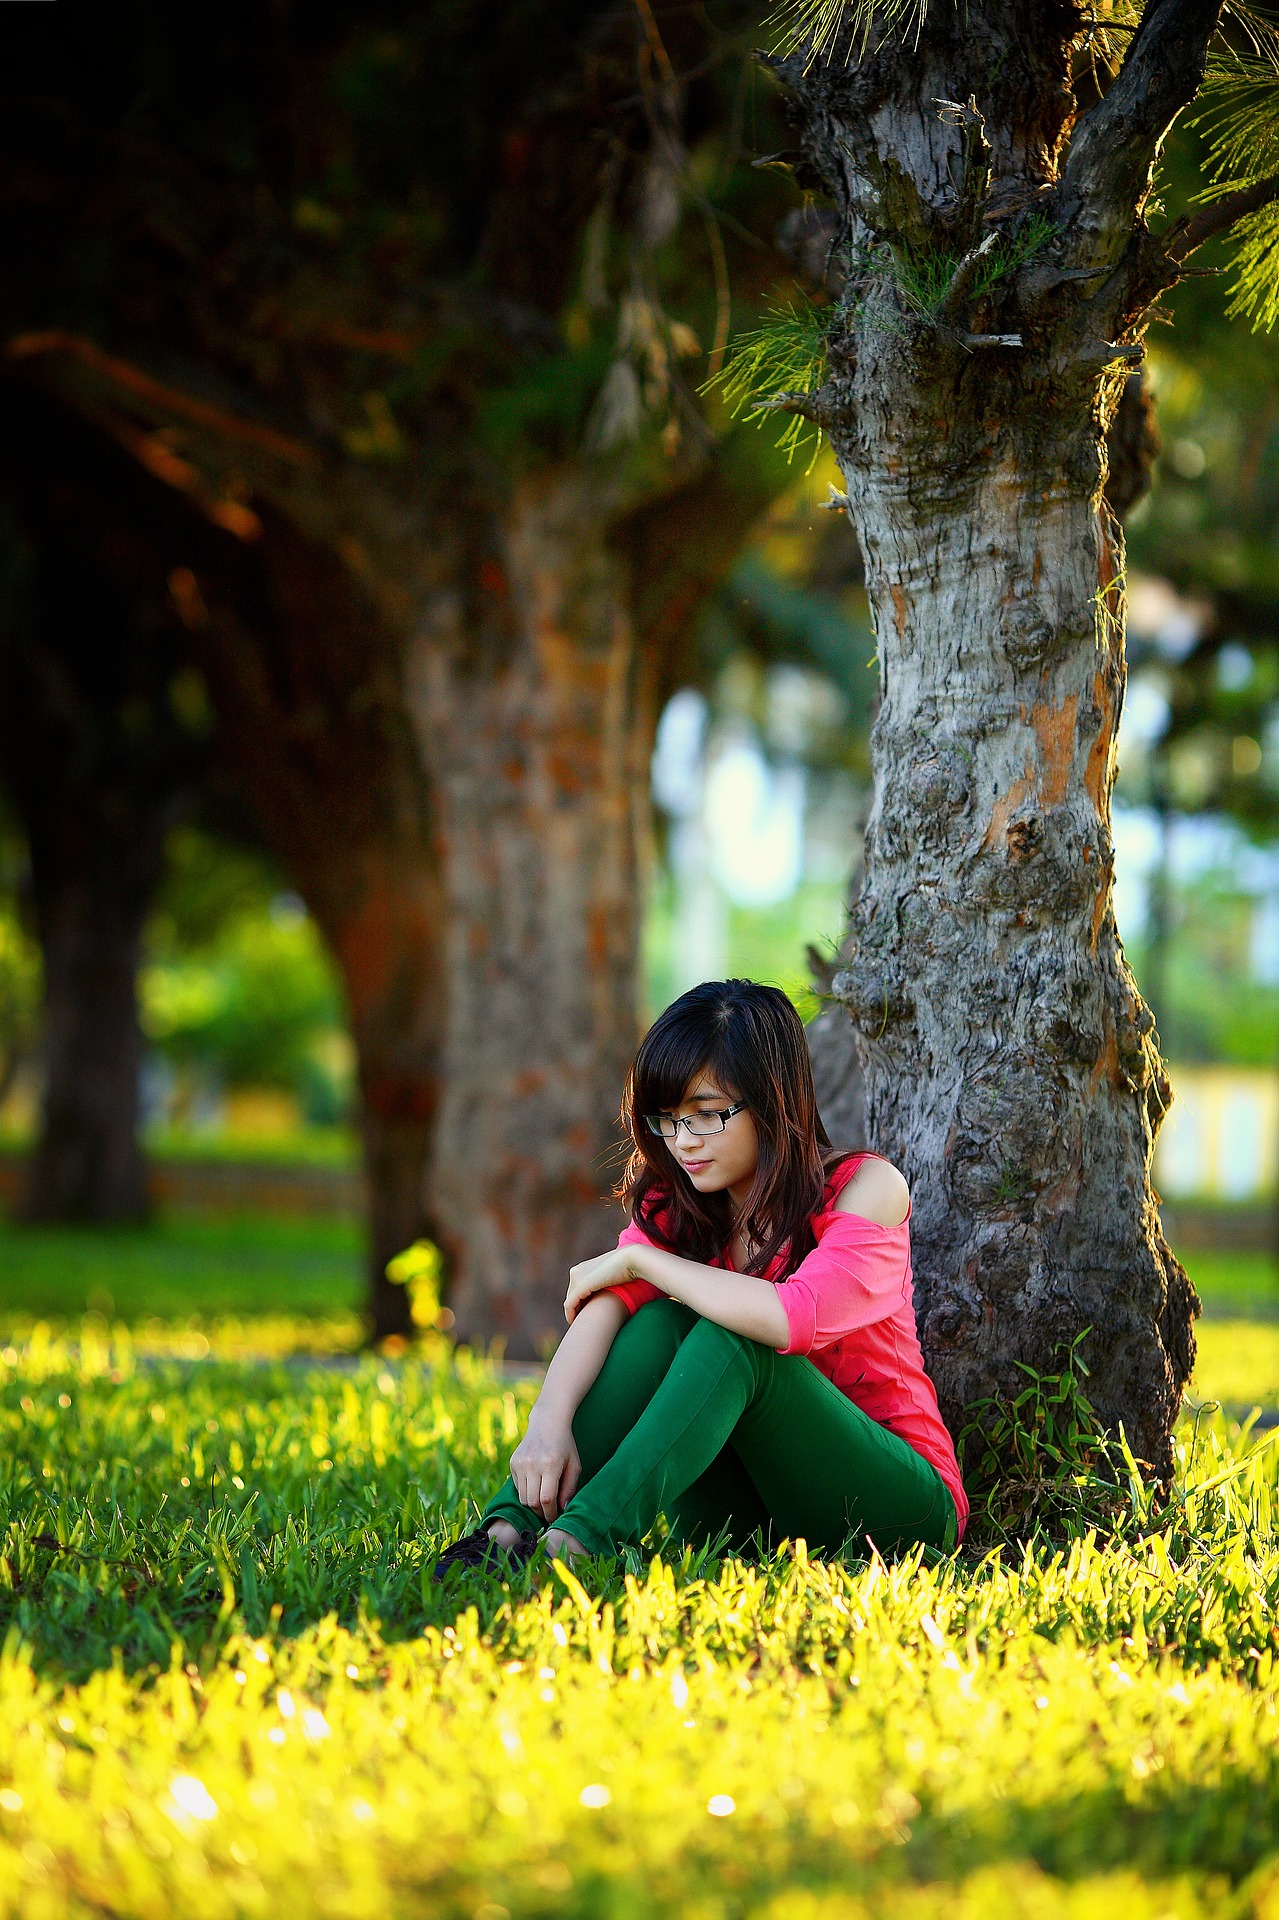 Girl on the grass photo